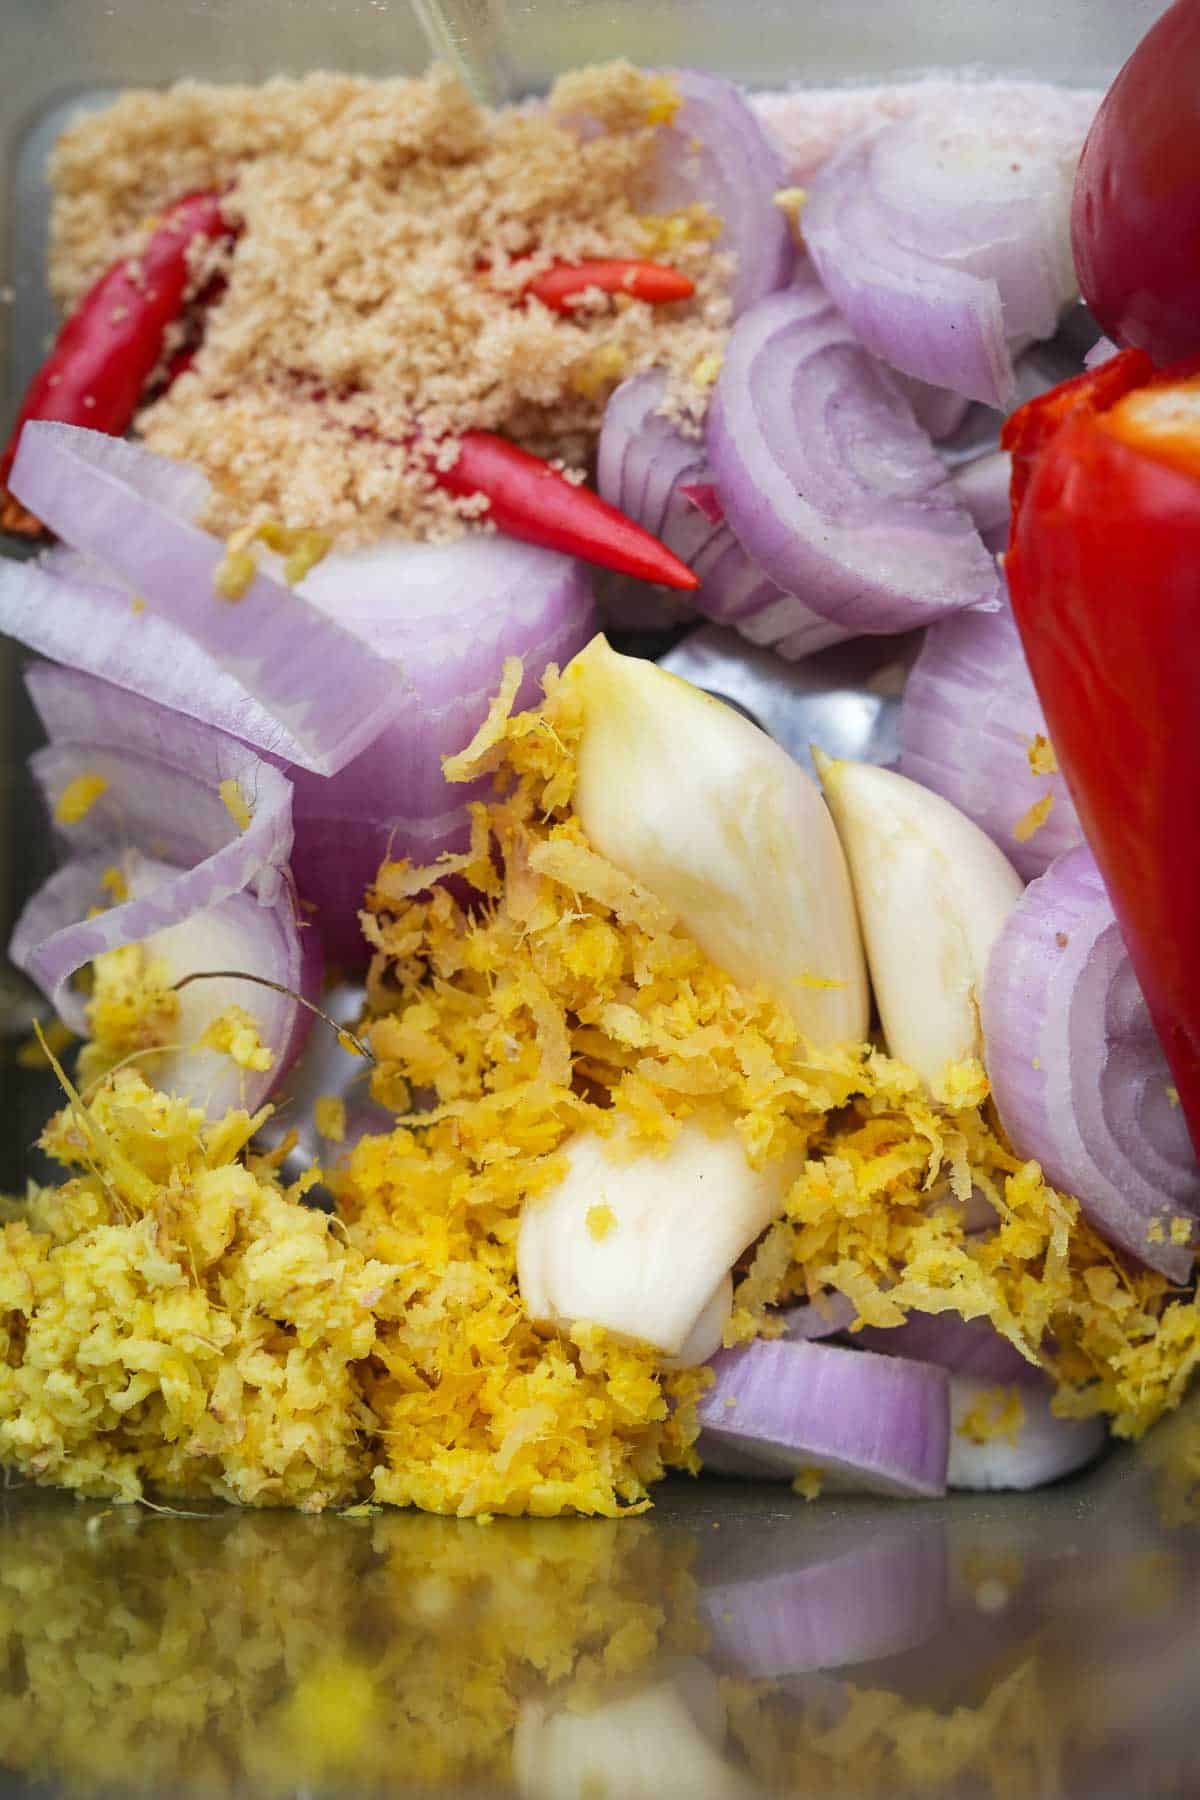 A blender filled with shallots, peppers, garlic, and other ingredients for making sambal.